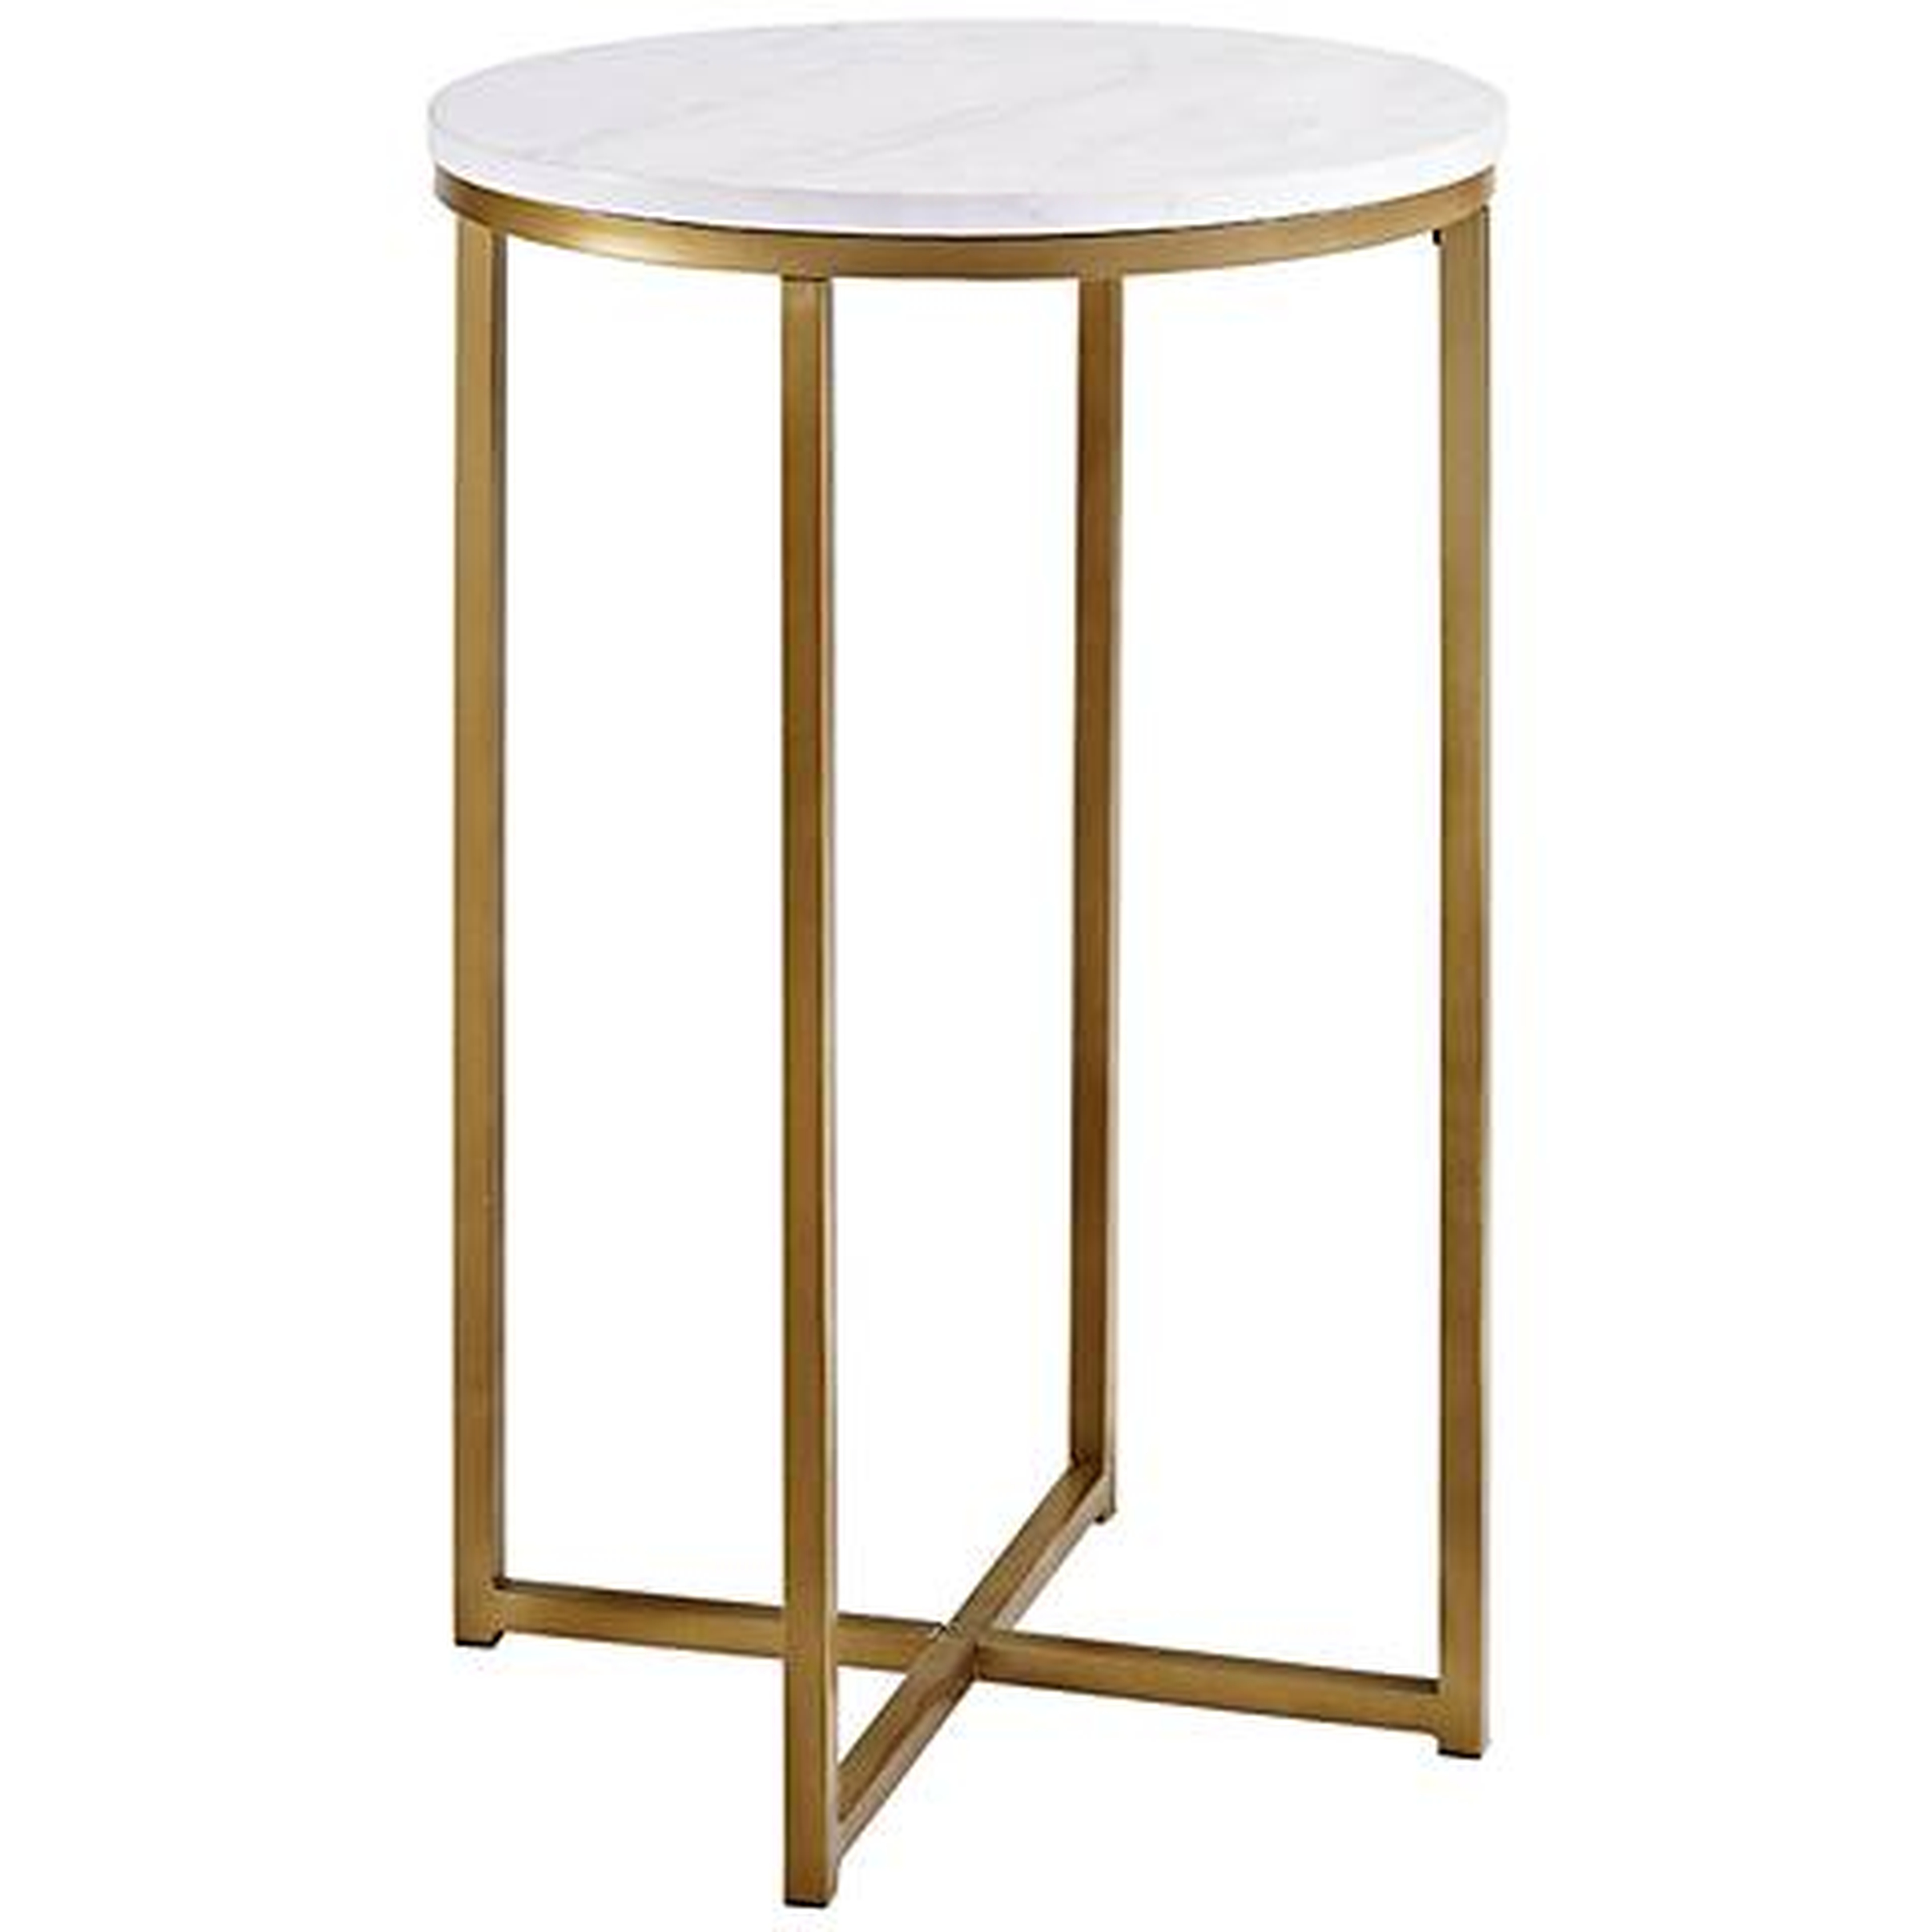 Aurelia Faux Marble Top and Gold Metal Round Side Table - Lamps Plus